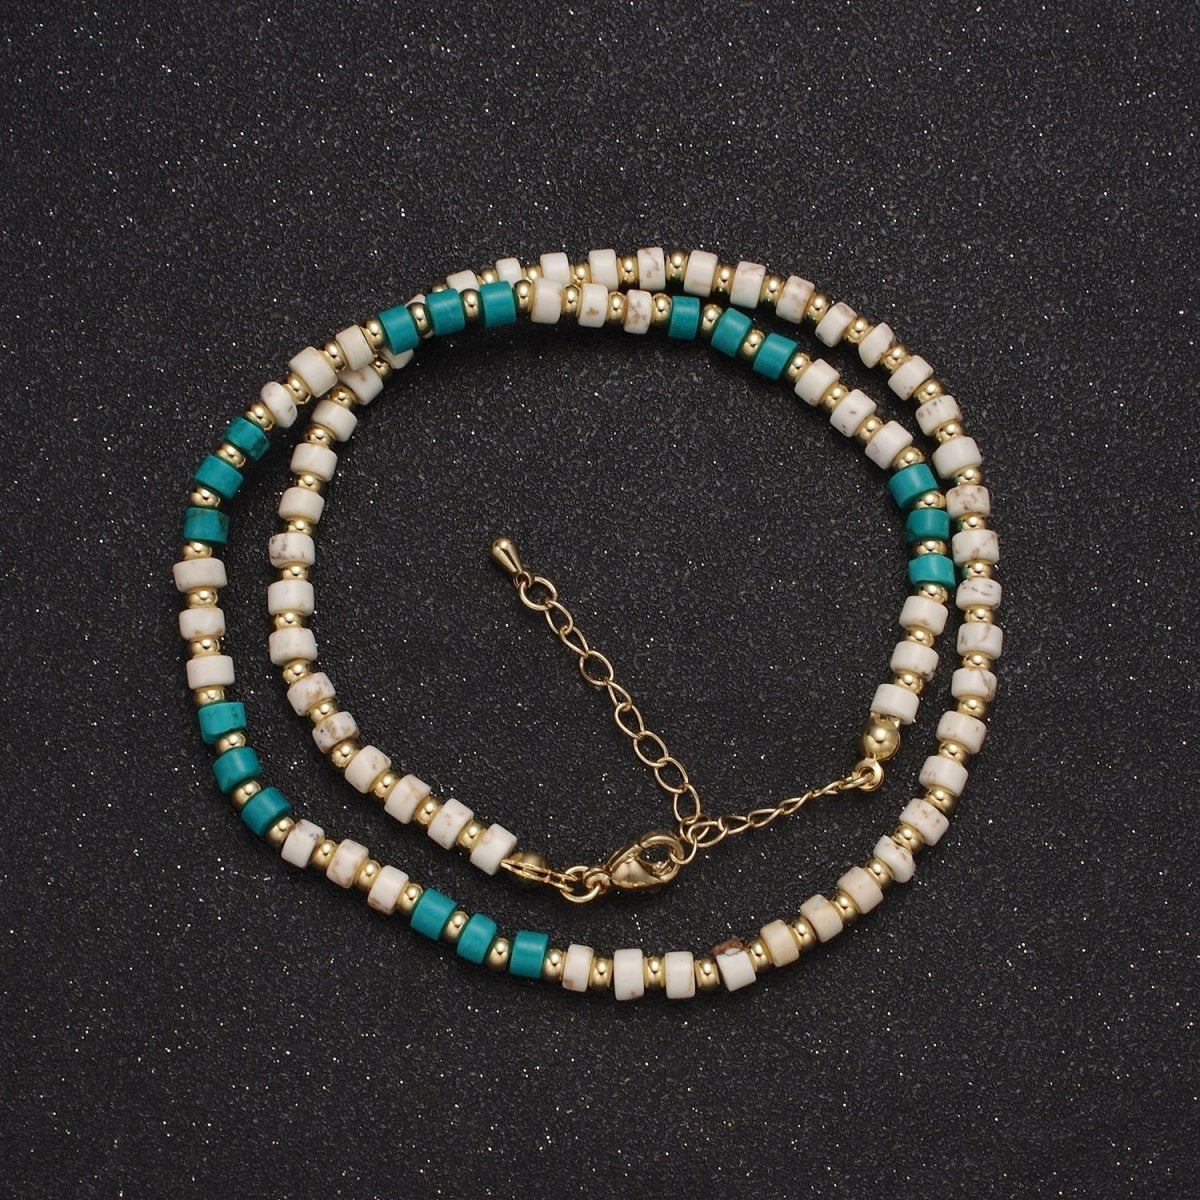 Genuine Natural Turquoise Beaded Necklace With Wooden Opal Beads Gemstone Necklace, Simple Classic Boho Layer Necklace | WA-588 Clearance Pricing - DLUXCA